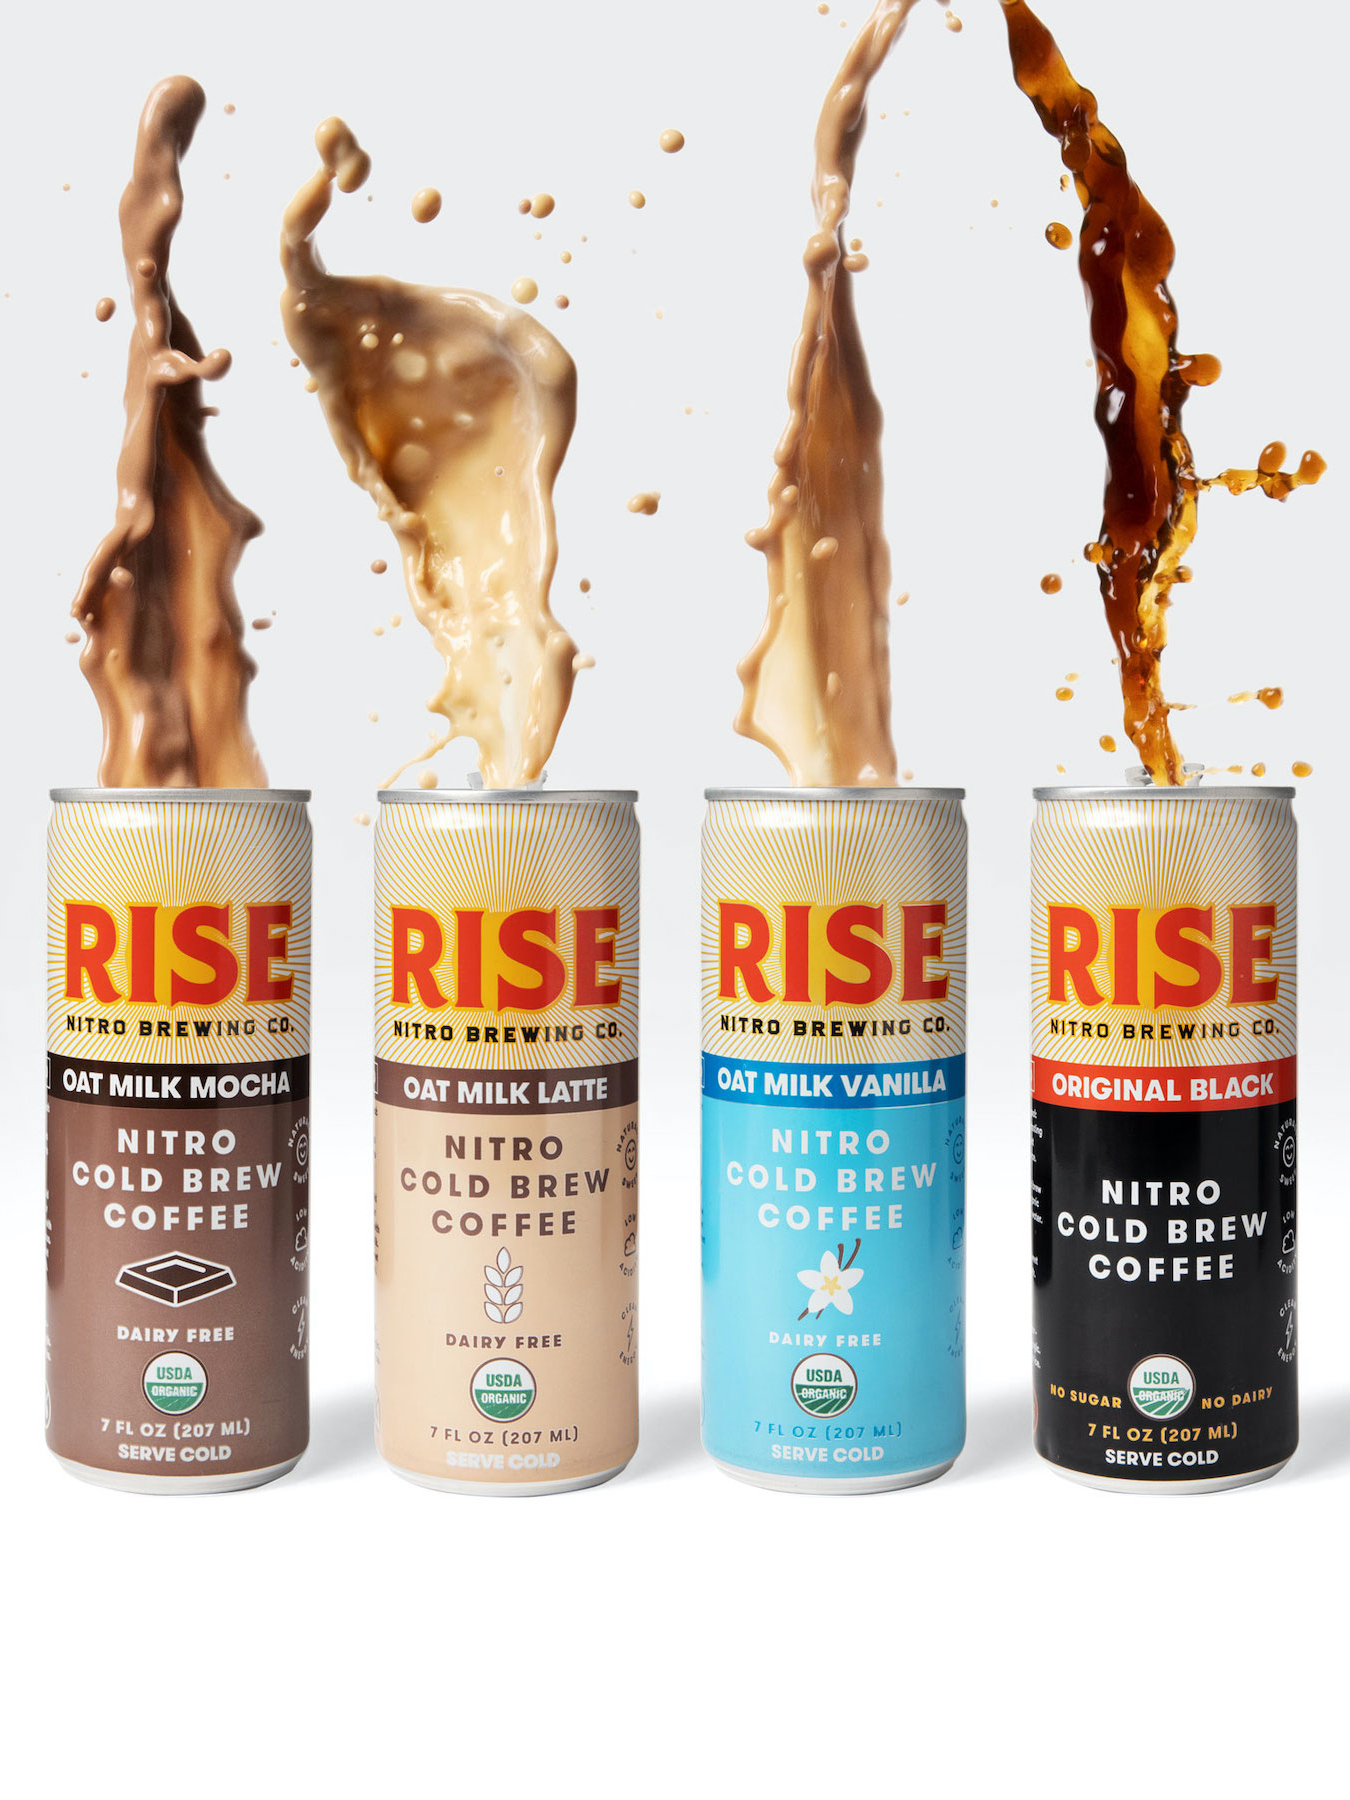 Look For RISE Brewing Coʼs Nitro Cold Brew Coffee On Sale NOW At Publix on I Heart Publix